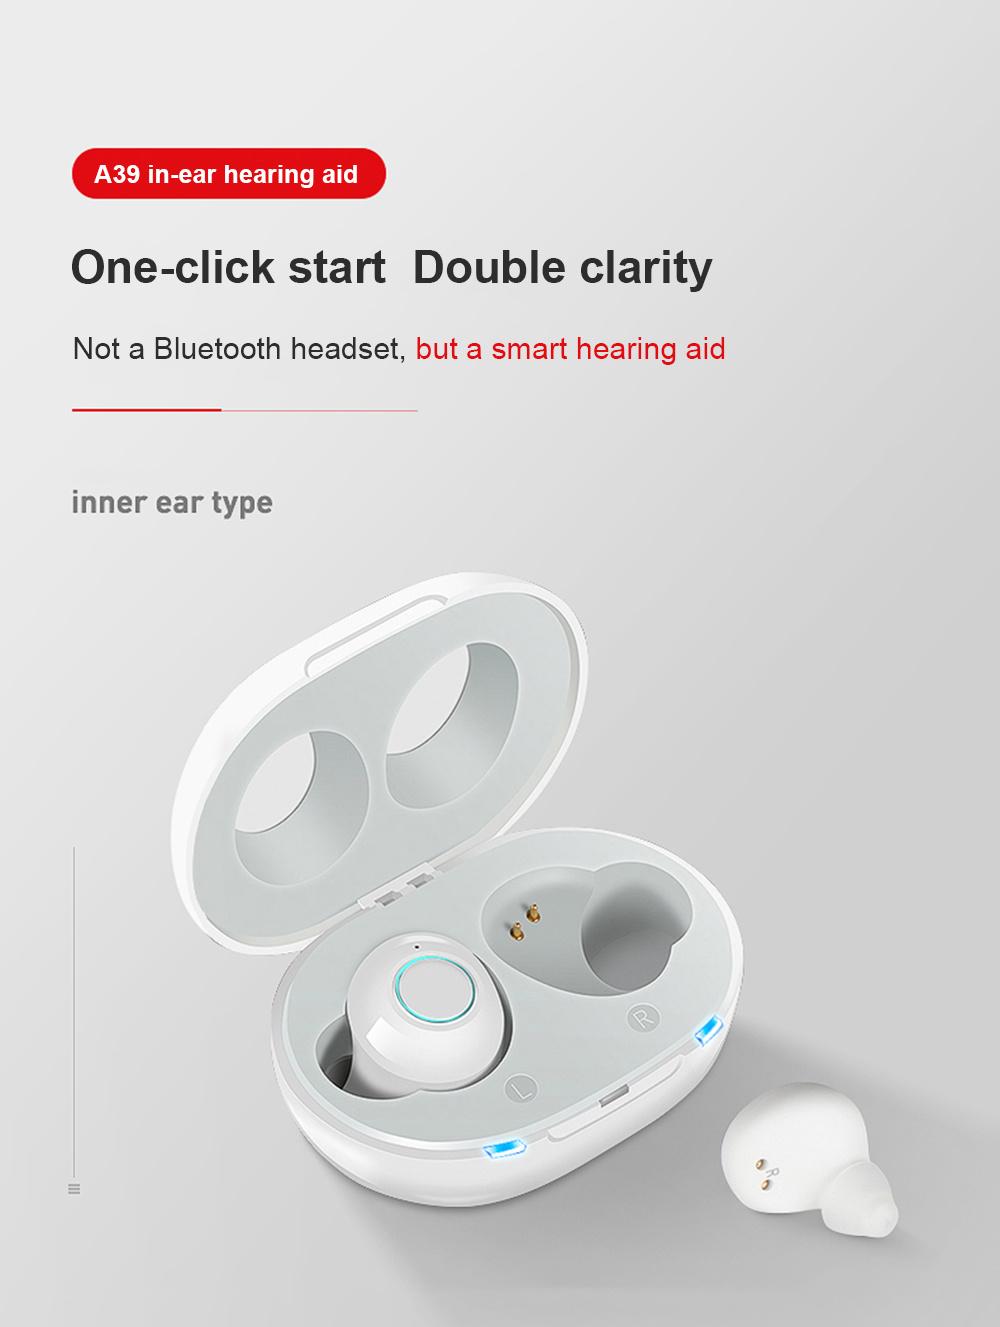 New Sound Emplifie Reachargeble Aids Price Hearing Aid Audiphones